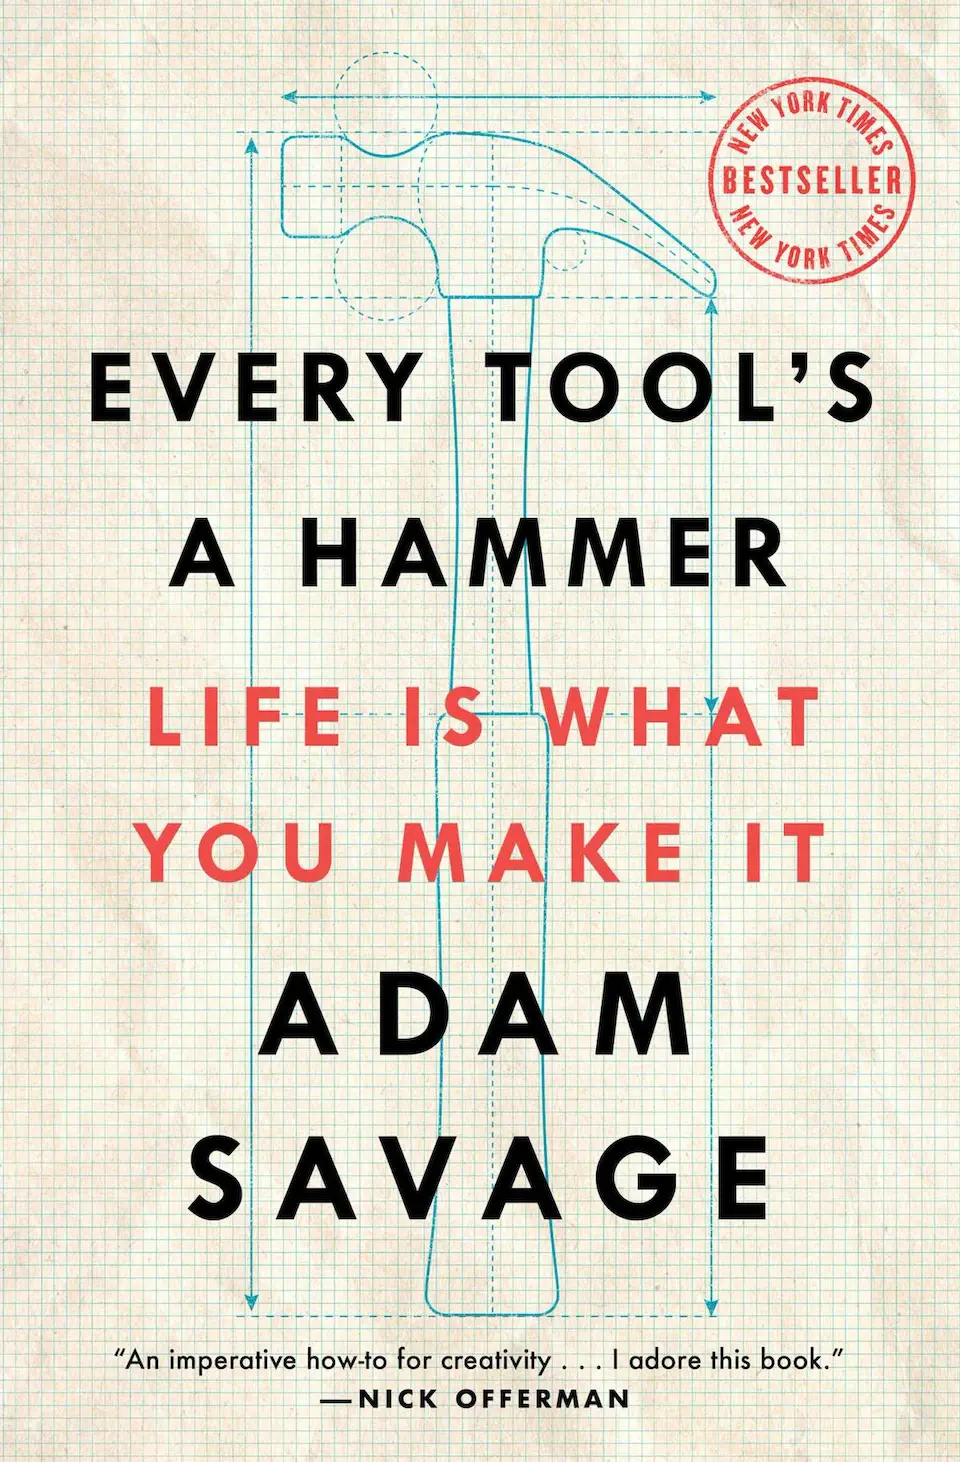 Every Tool's a Hammer: Life Is What You Make It by Adam Savage finished on 2022 Mar 01